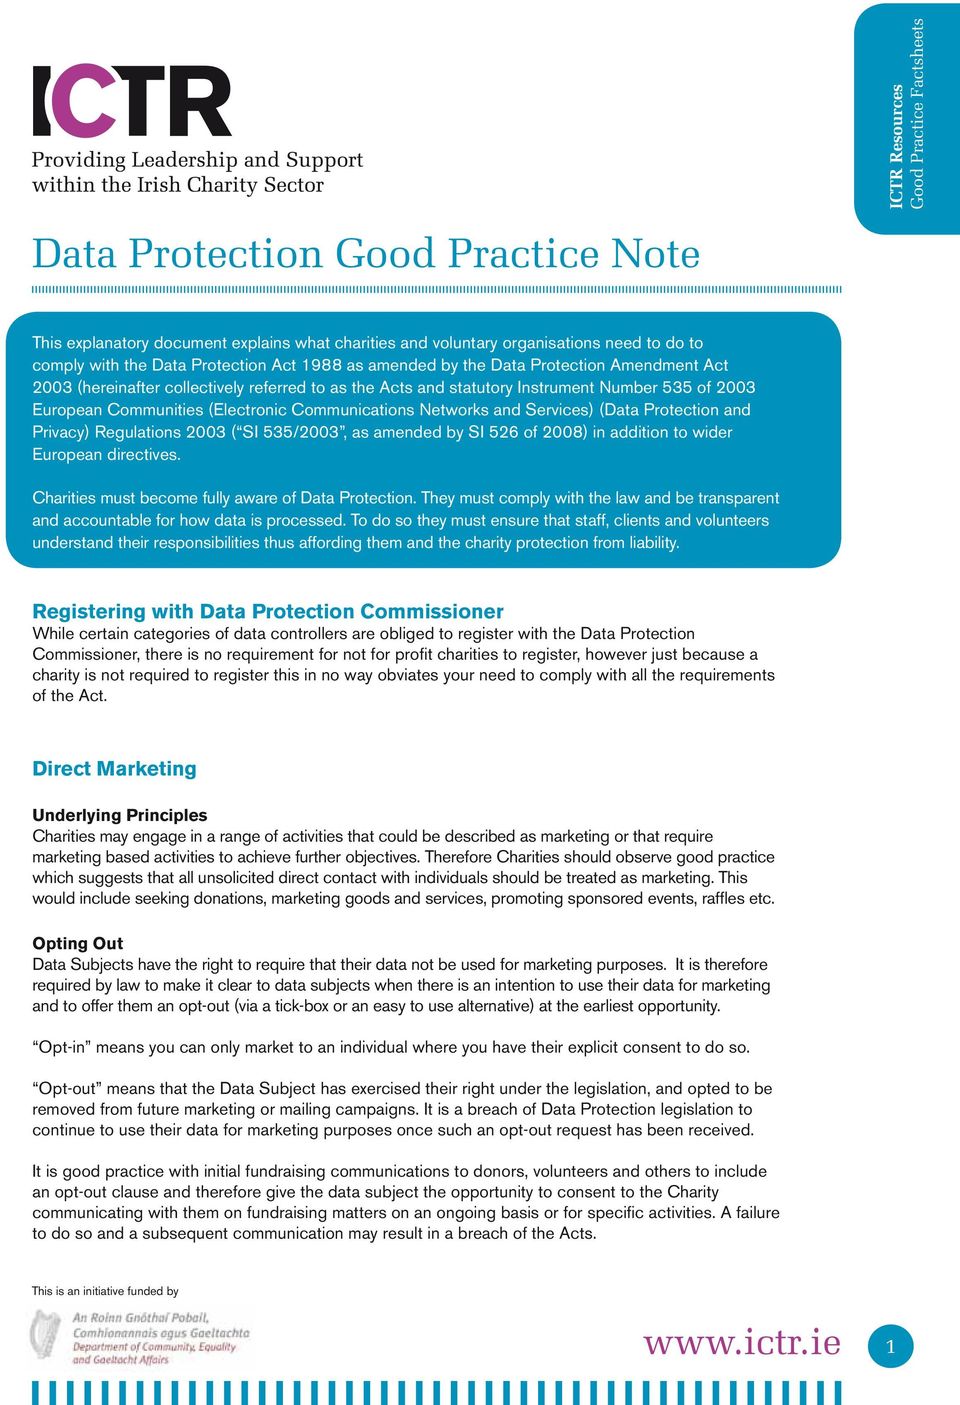 (Data Protection and Privacy) Regulations 2003 ( SI 535/2003, as amended by SI 526 of 2008) in addition to wider European directives. Charities must become fully aware of Data Protection.